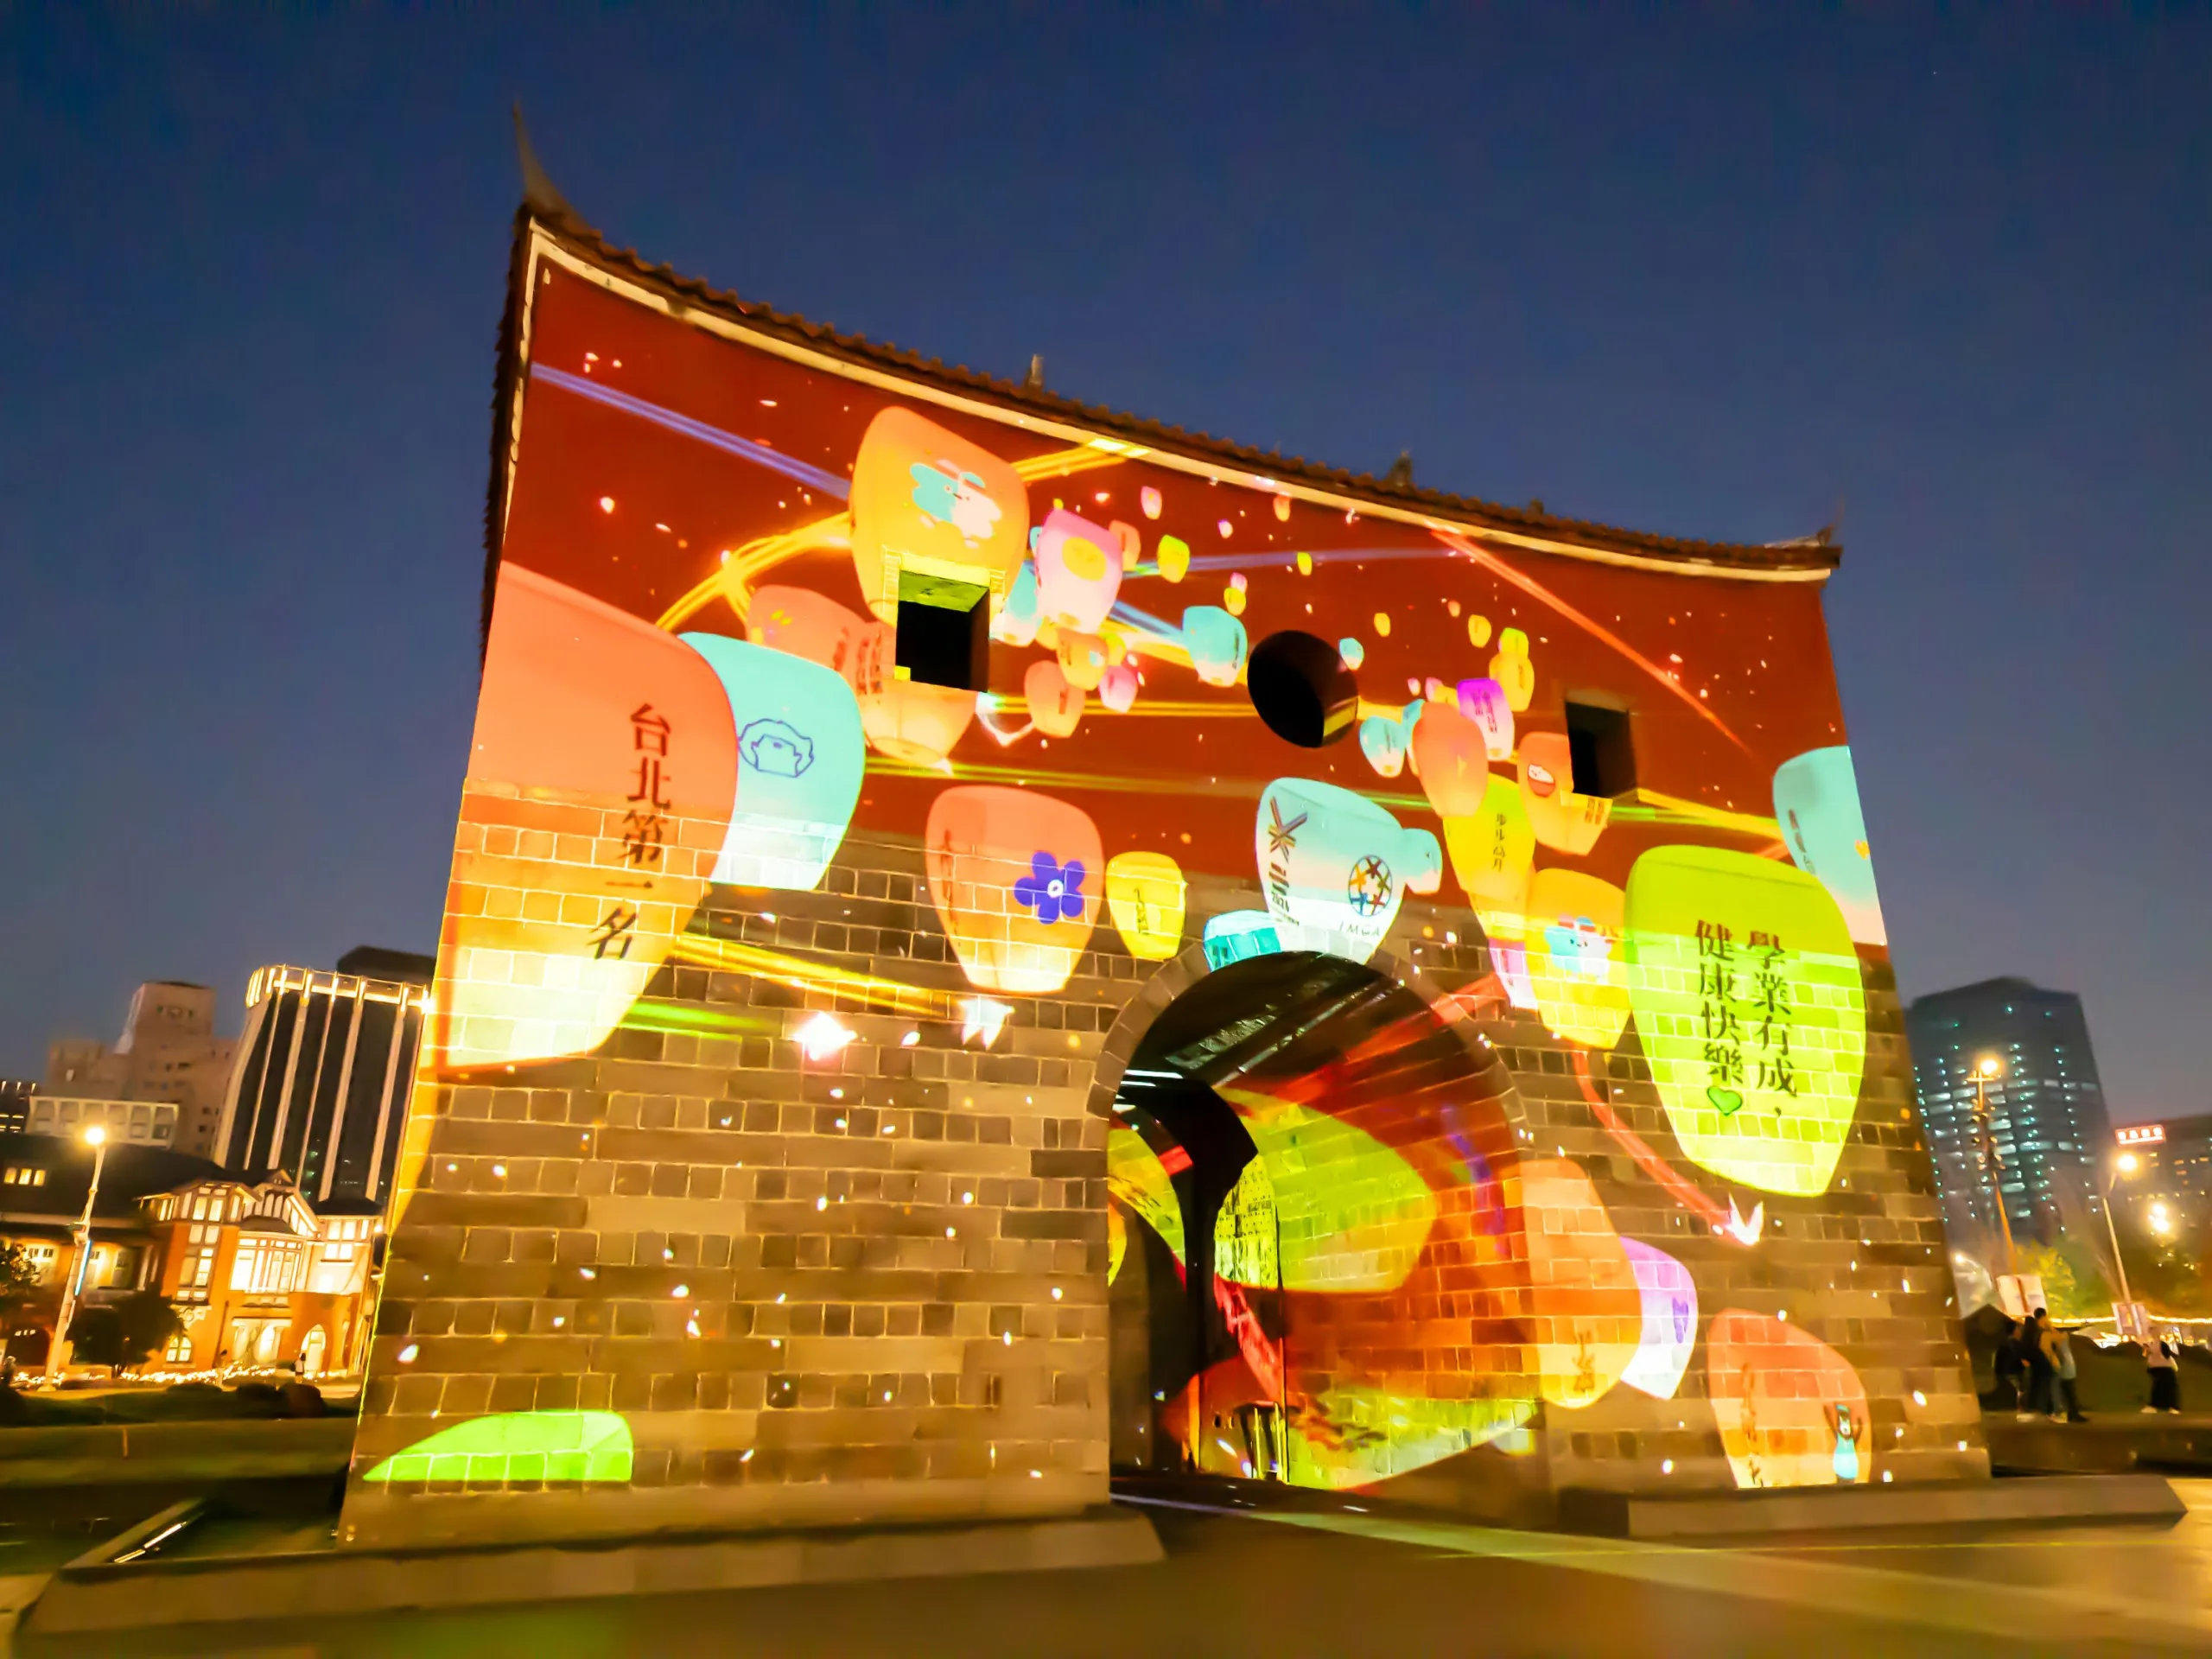 The light carving performance, titled "North Gate Reflections," introduces interactive experiences for the first time. Attendees can scan a QR code with their smartphones to project their New Year wishes and blessings onto the North Gate.